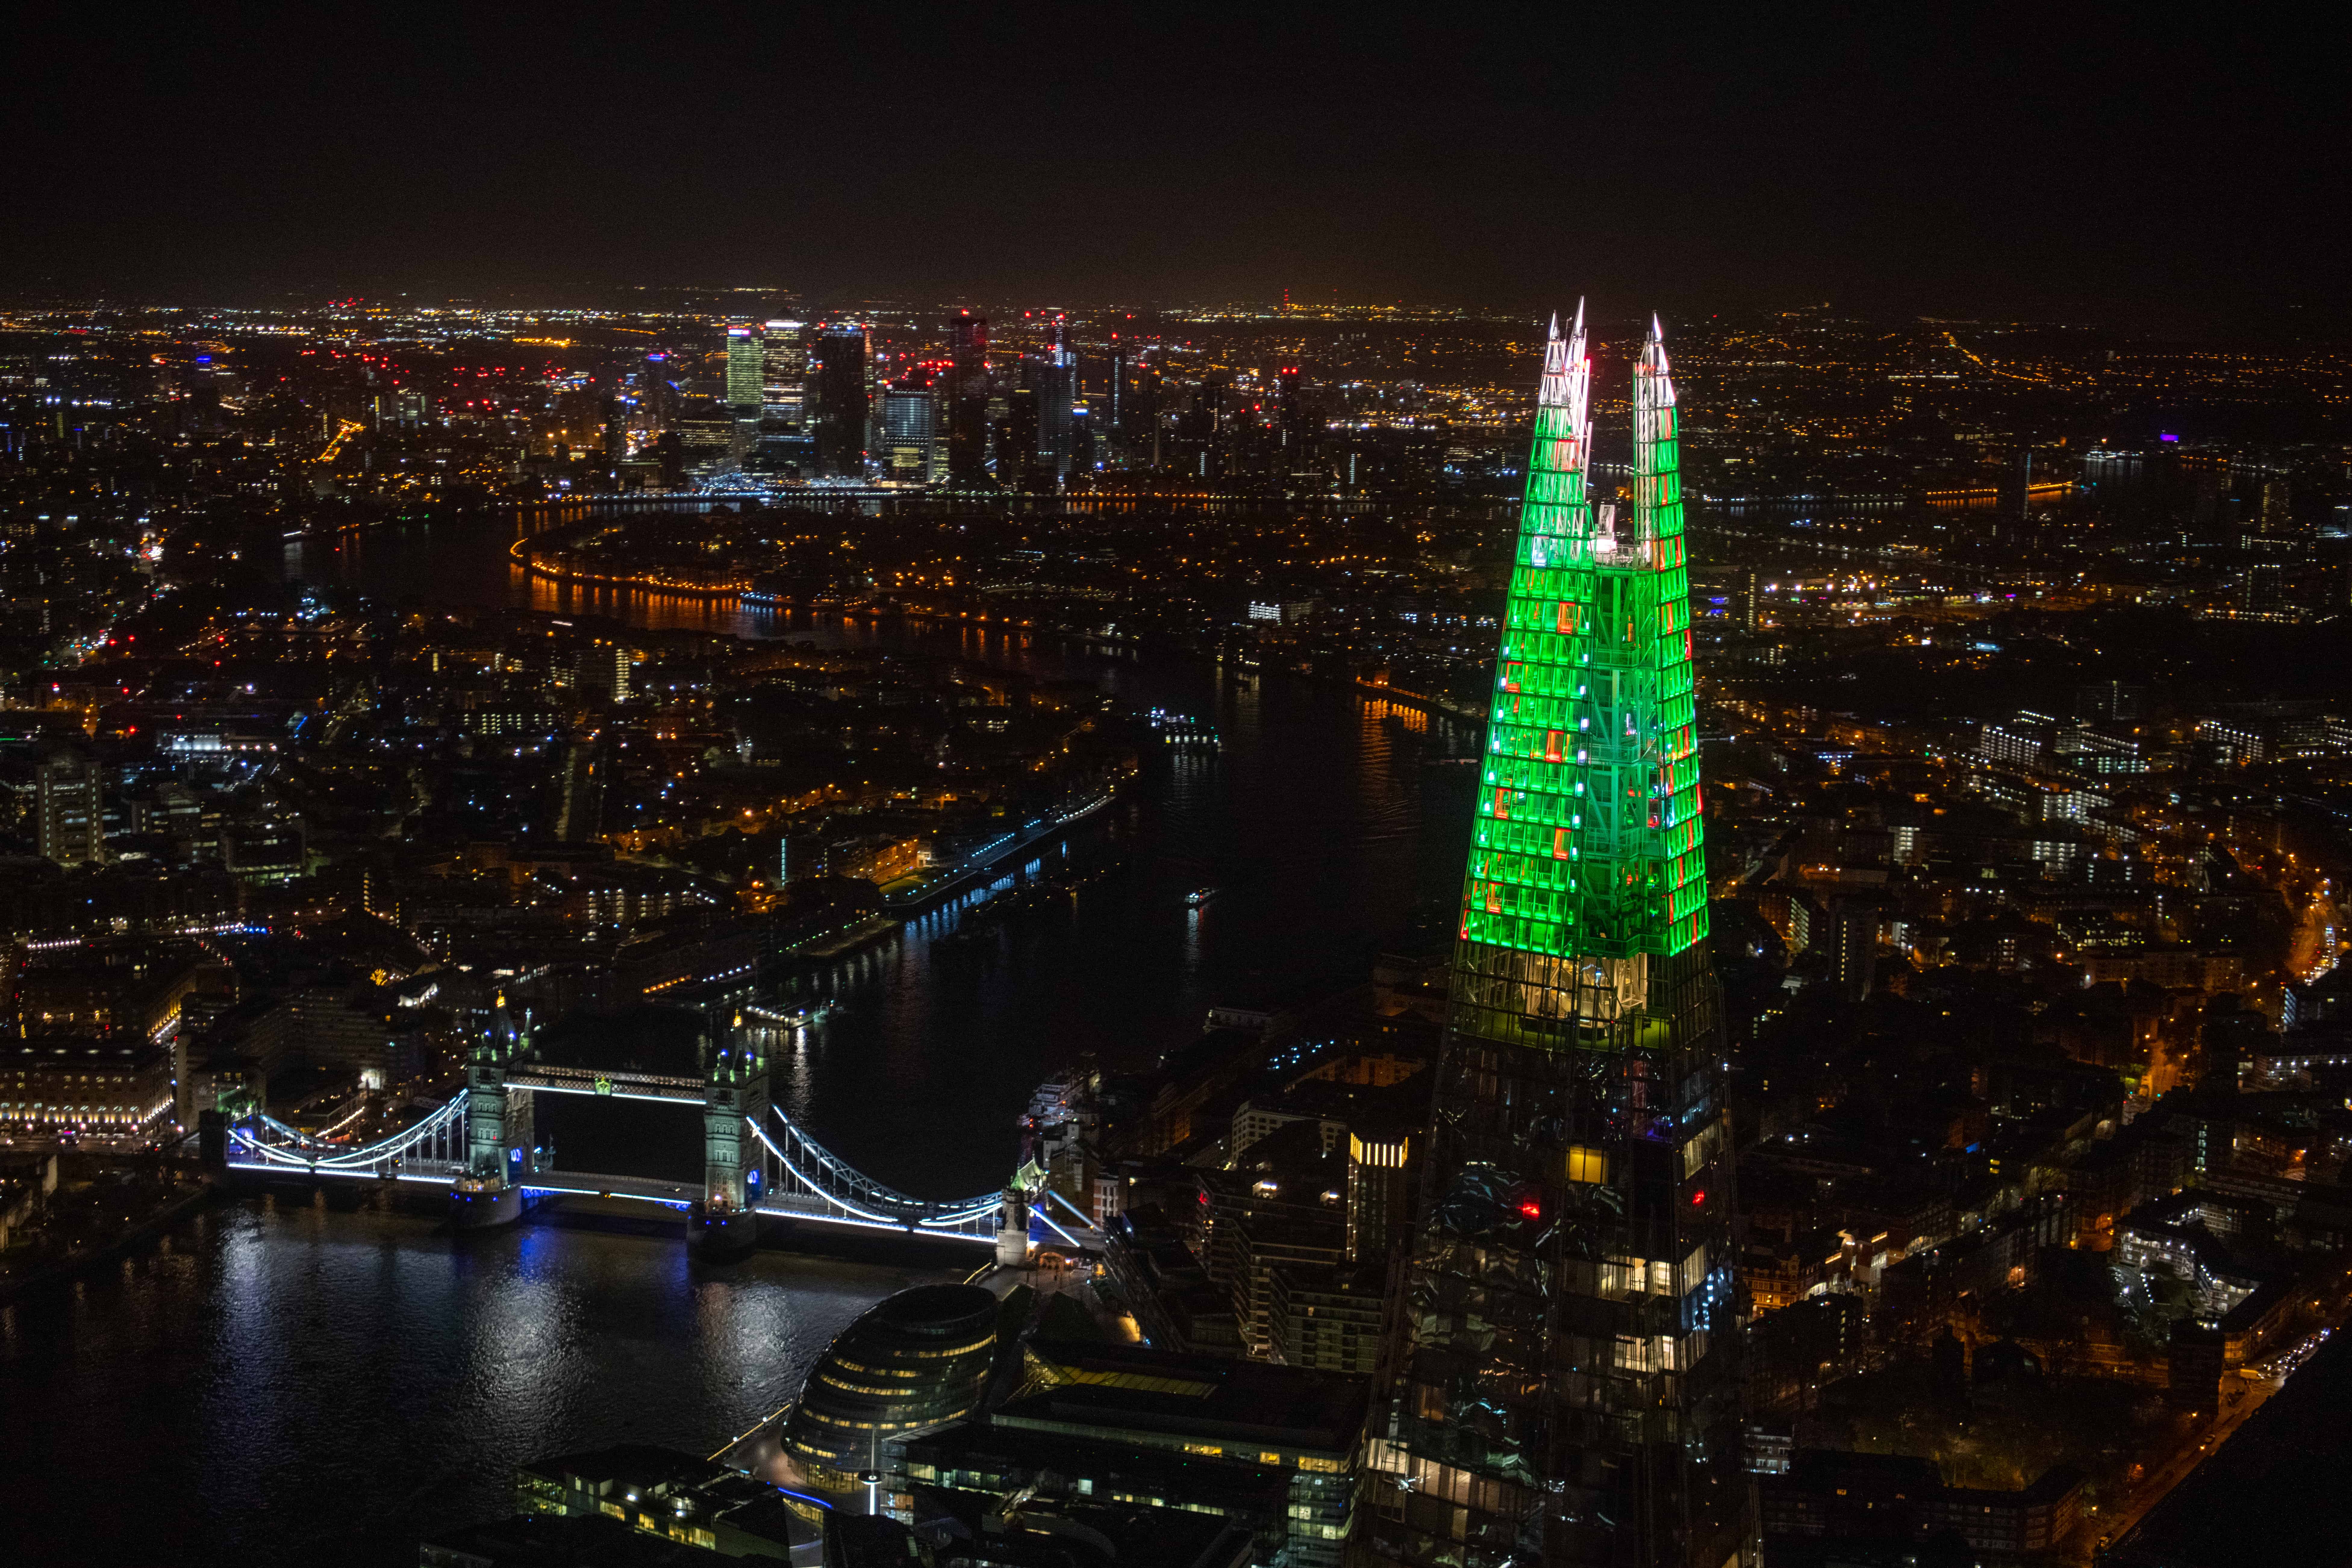 The festive Shard displays were designed by local Bermondsey primary school pupils